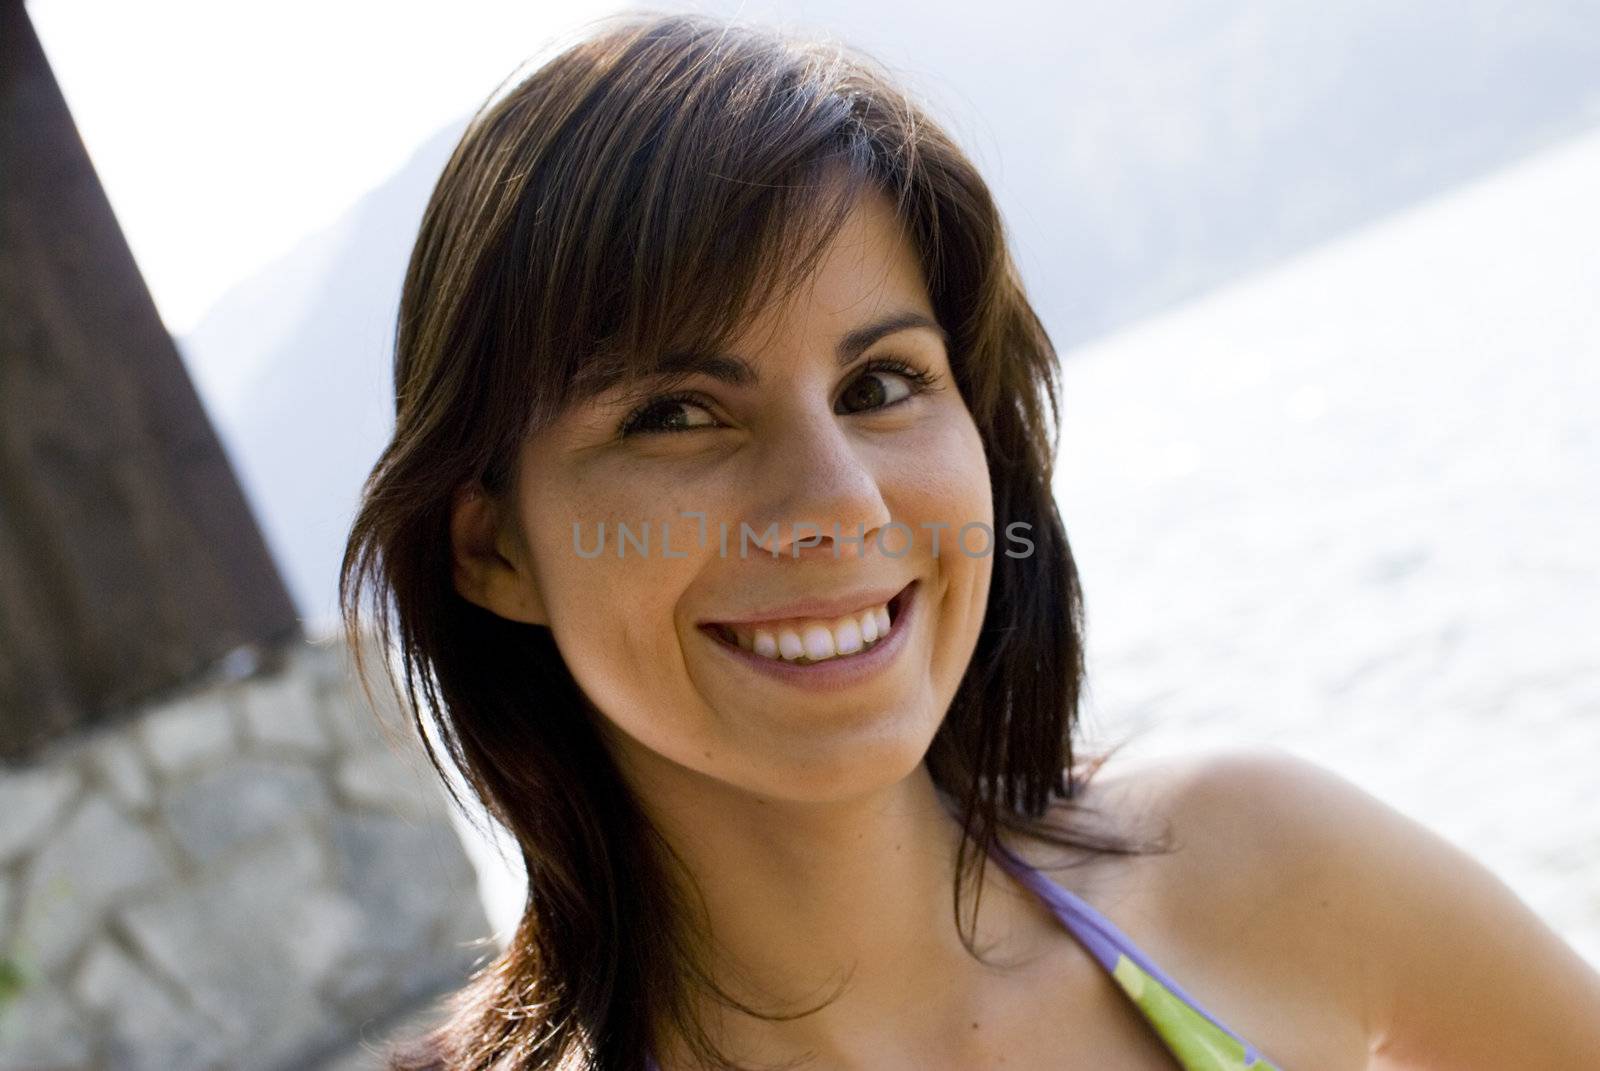 Beautiful girl smiling by fahrner